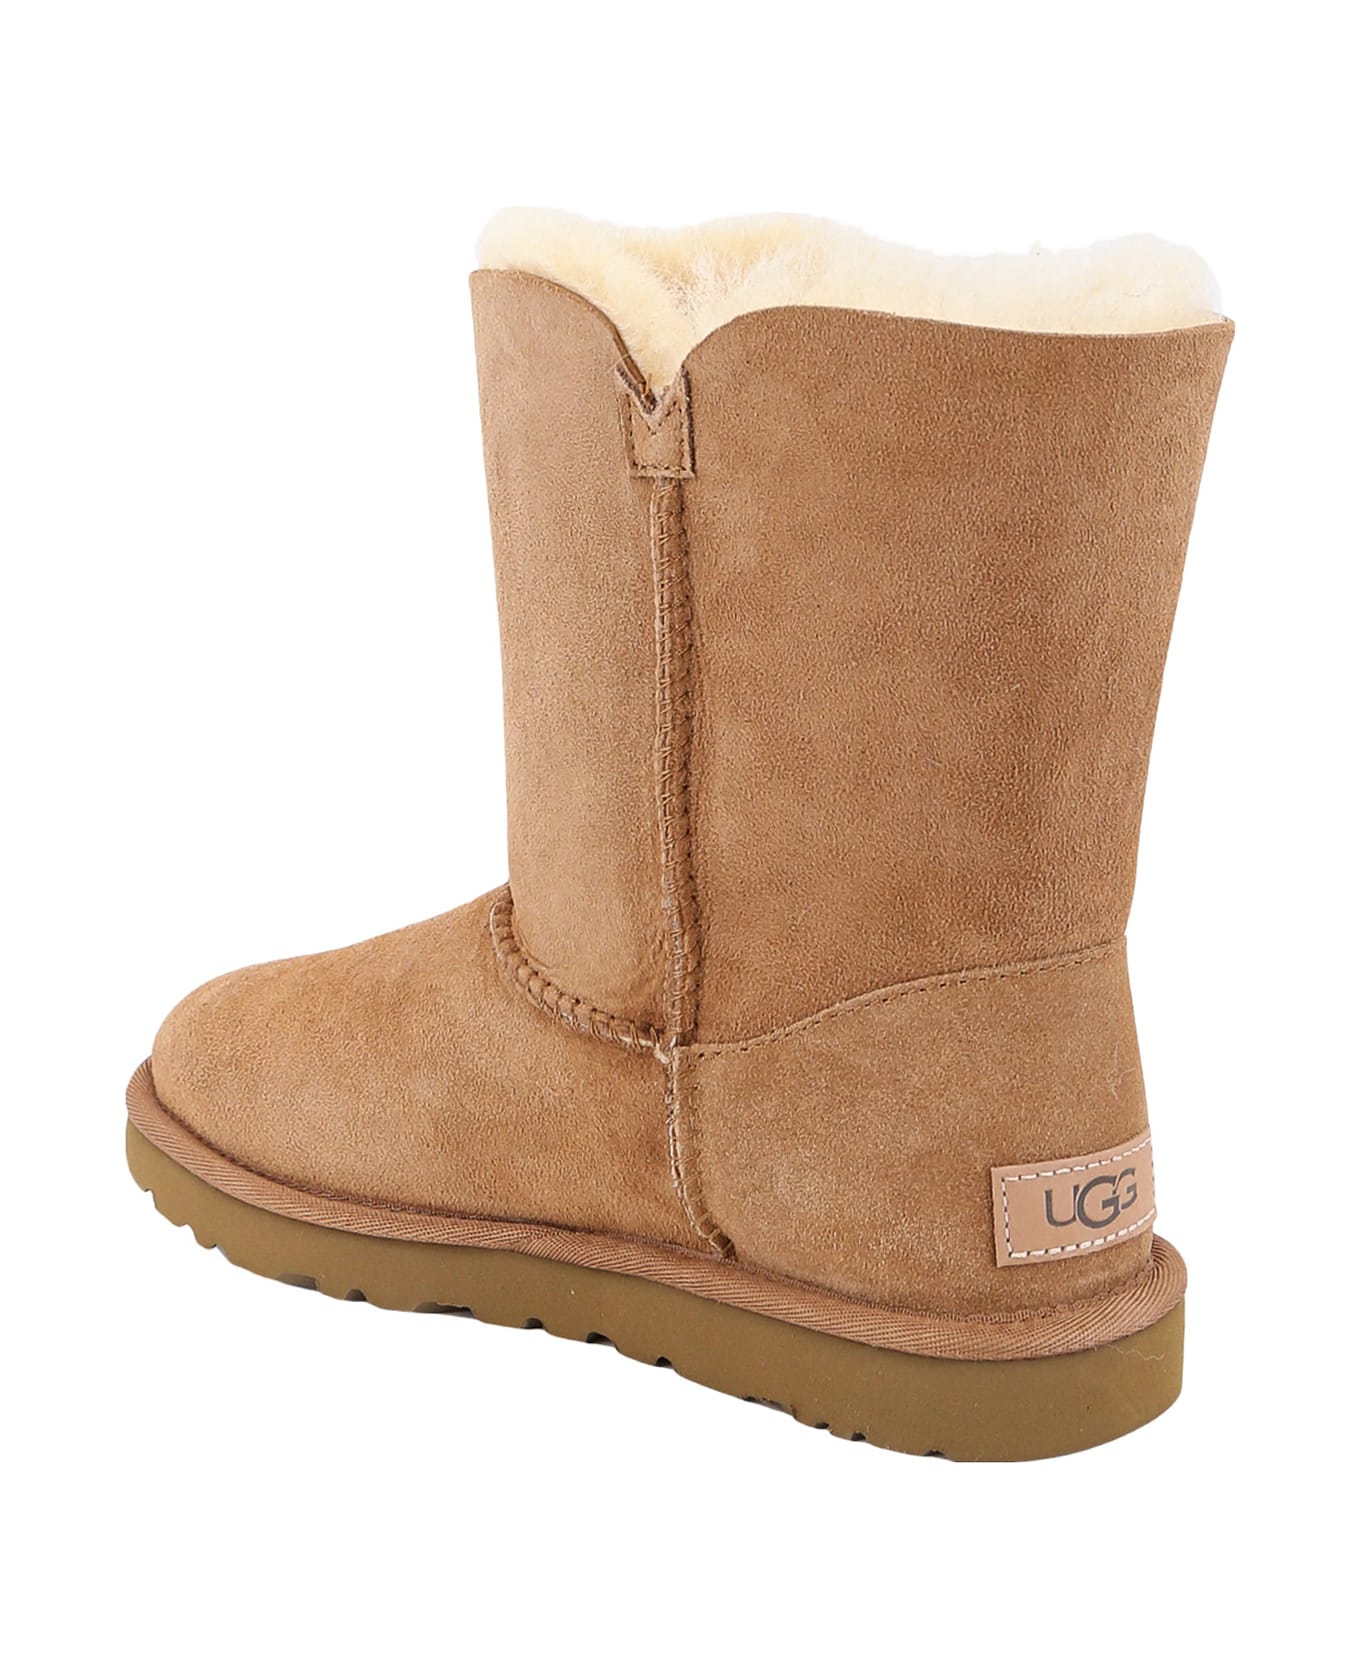 UGG Bailey Button Boots - Beige ブーツ